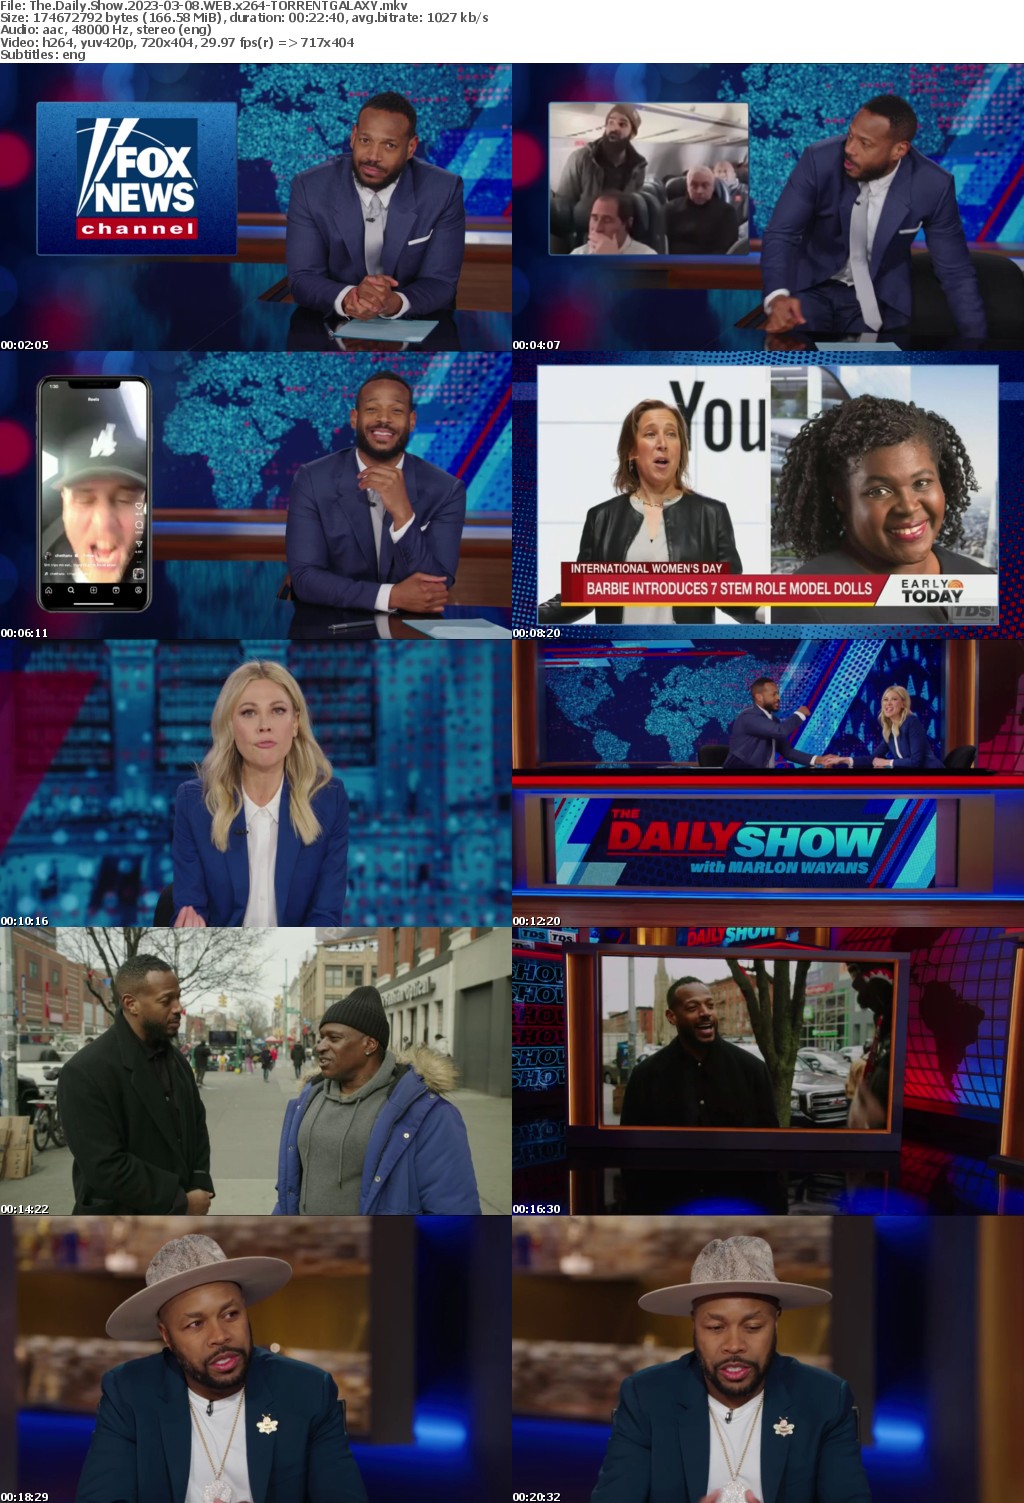 The Daily Show 2023-03-08 WEB x264-GALAXY